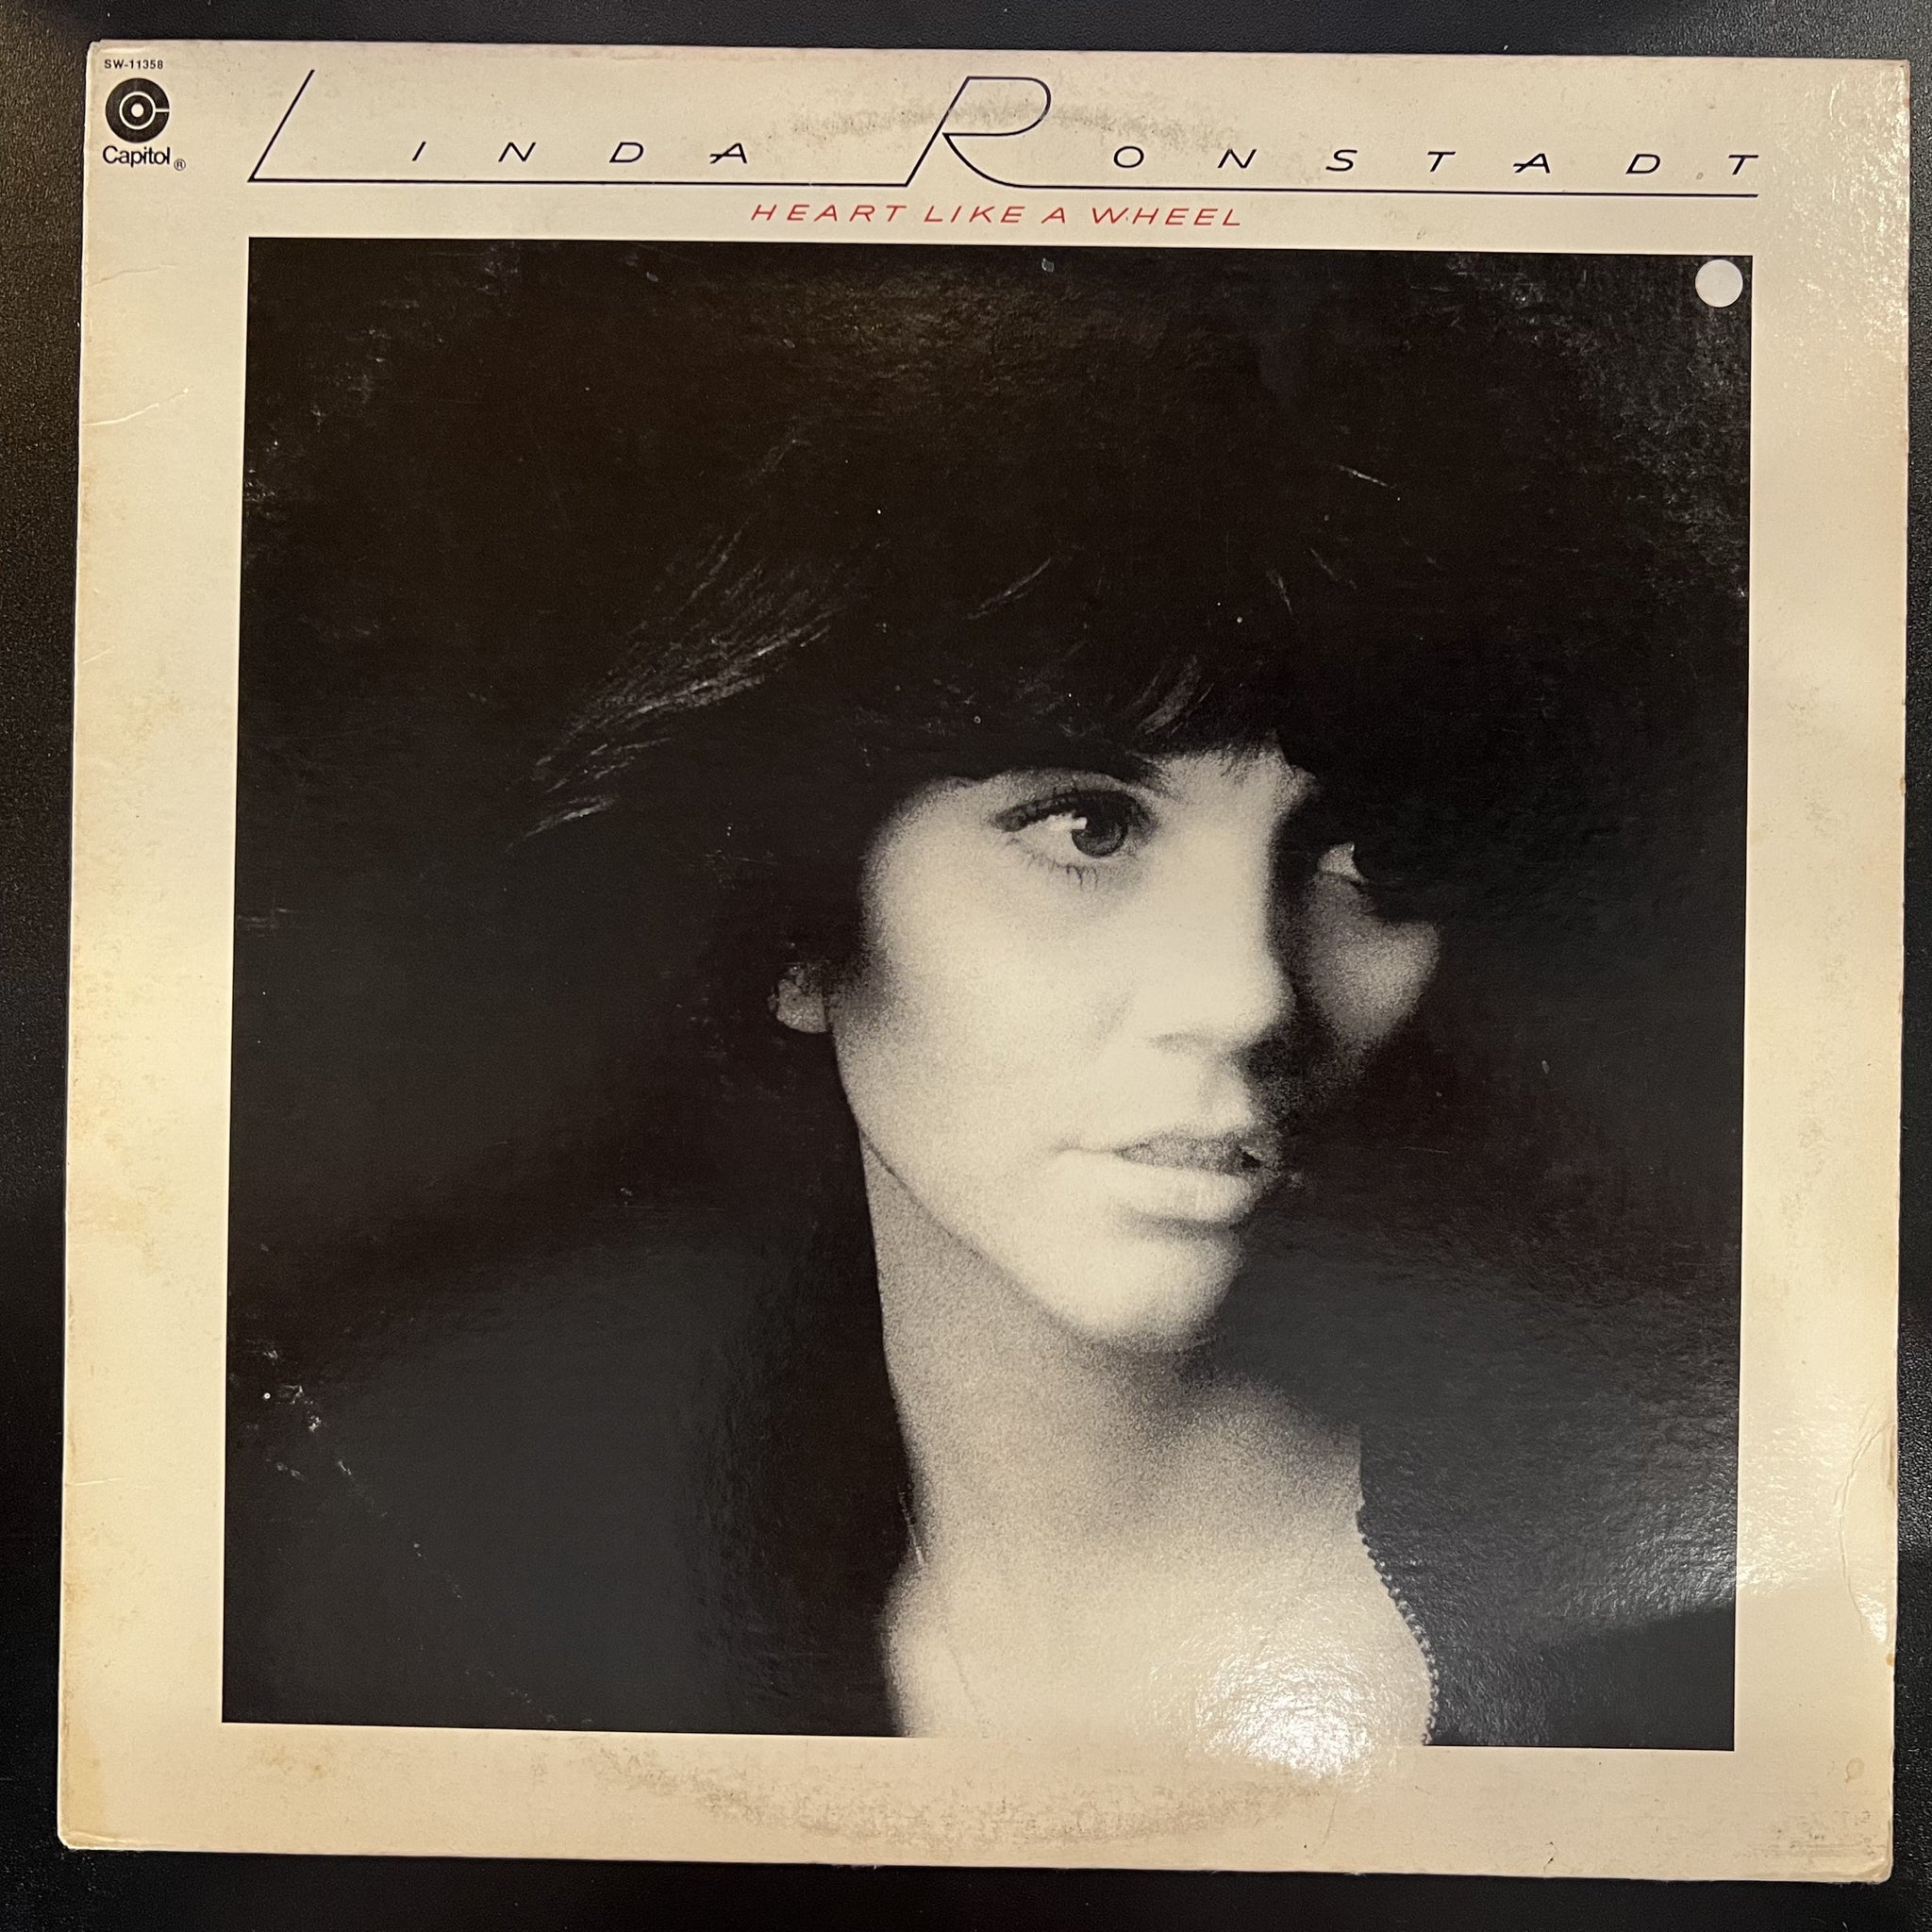 Linda Ronstadt – Heart Like A Wheel - VG+ LP Record 1977 Capitol USA Vinyl - Country Rock / Soft Rock / Country